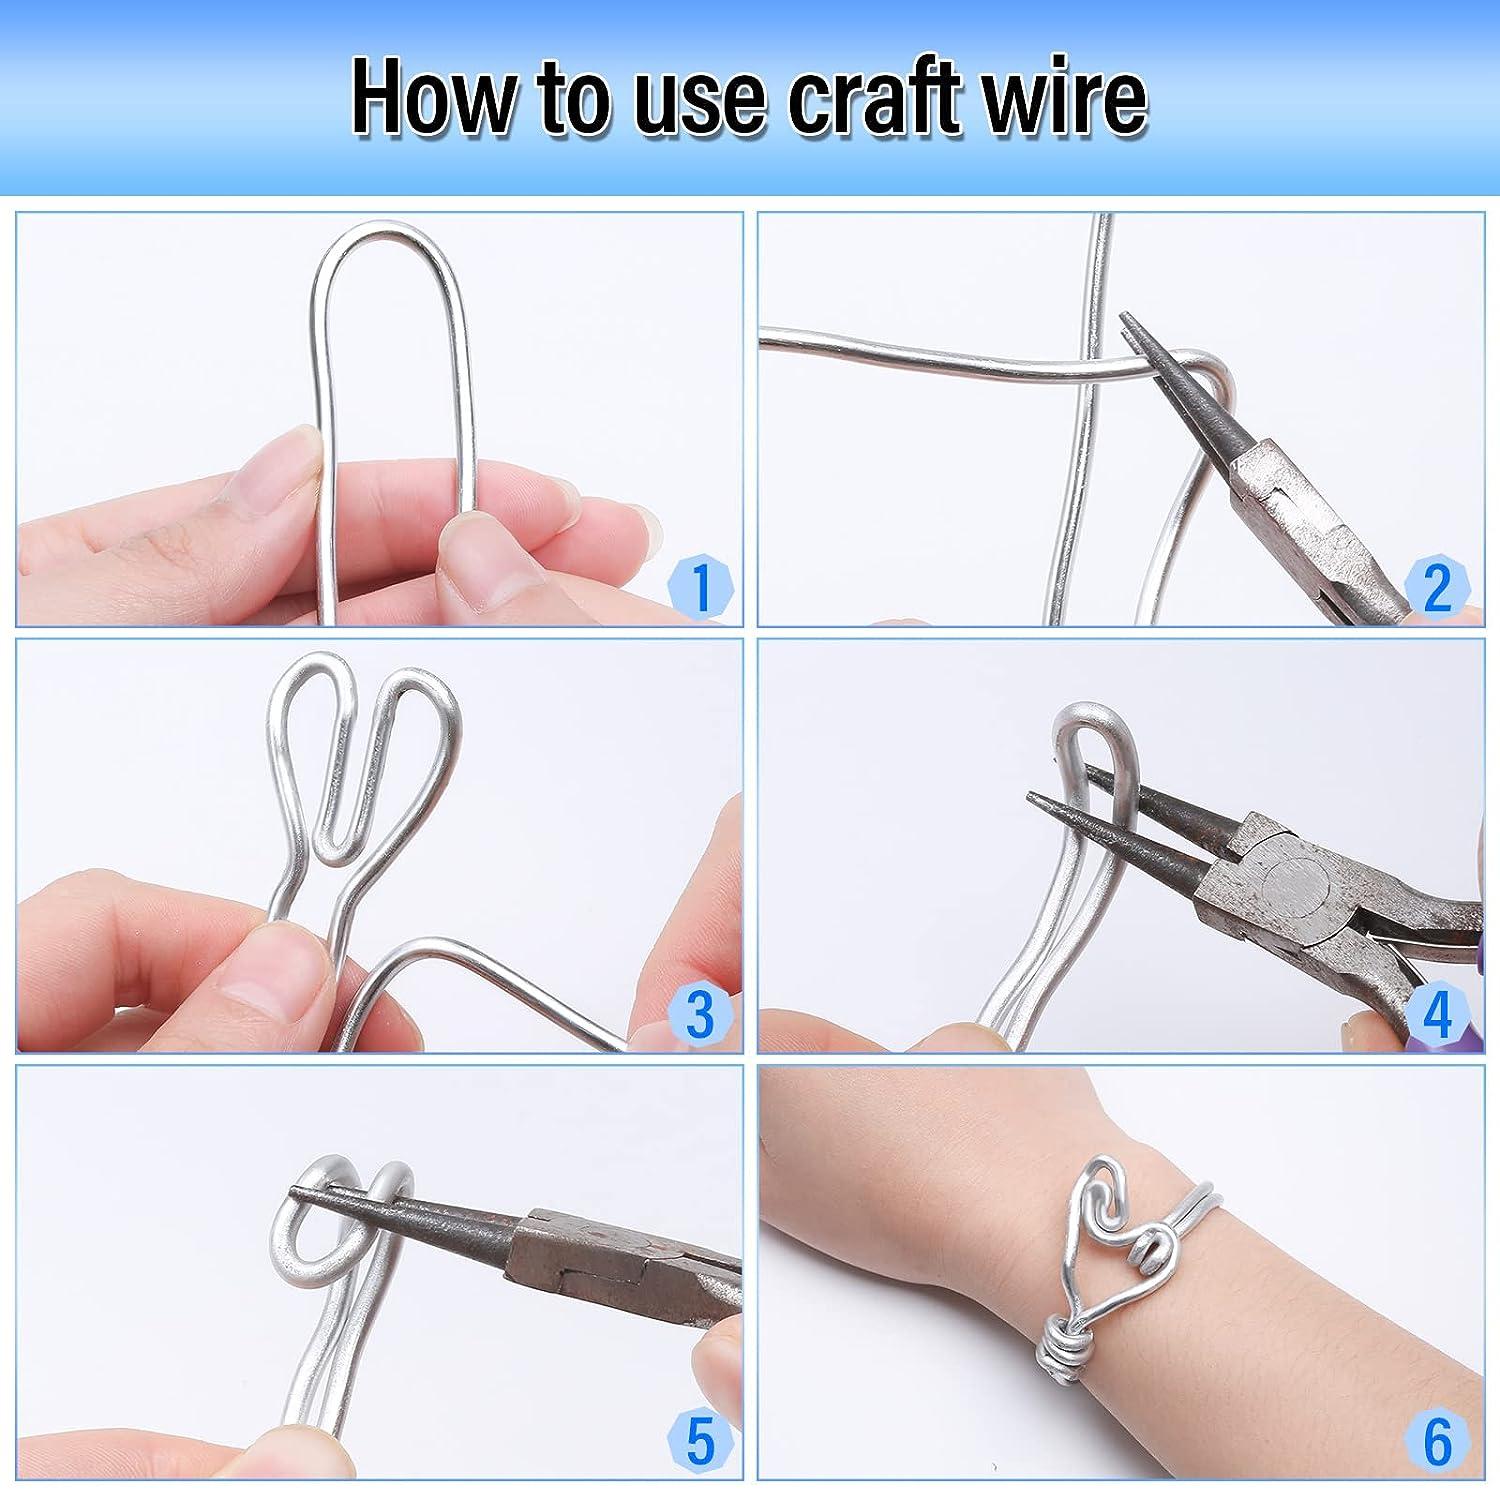 Does anyone knows Where can I find this metal wire for crafts